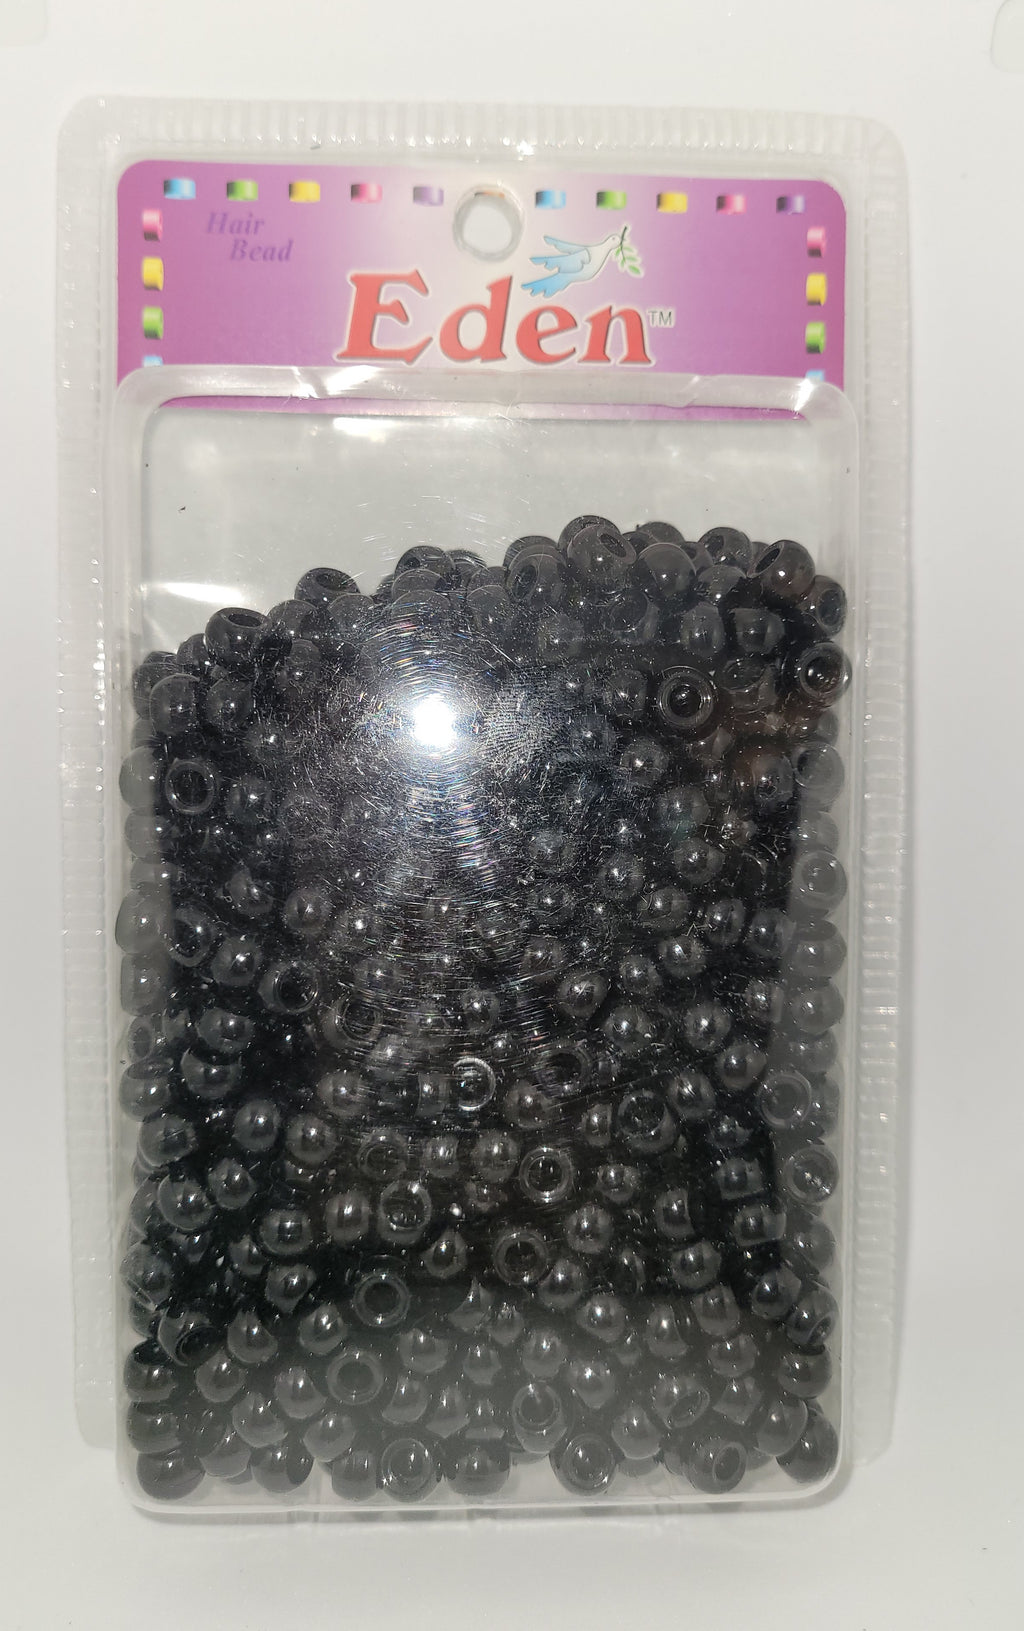 Eden Black Small Beads Large Pack (BR1B)